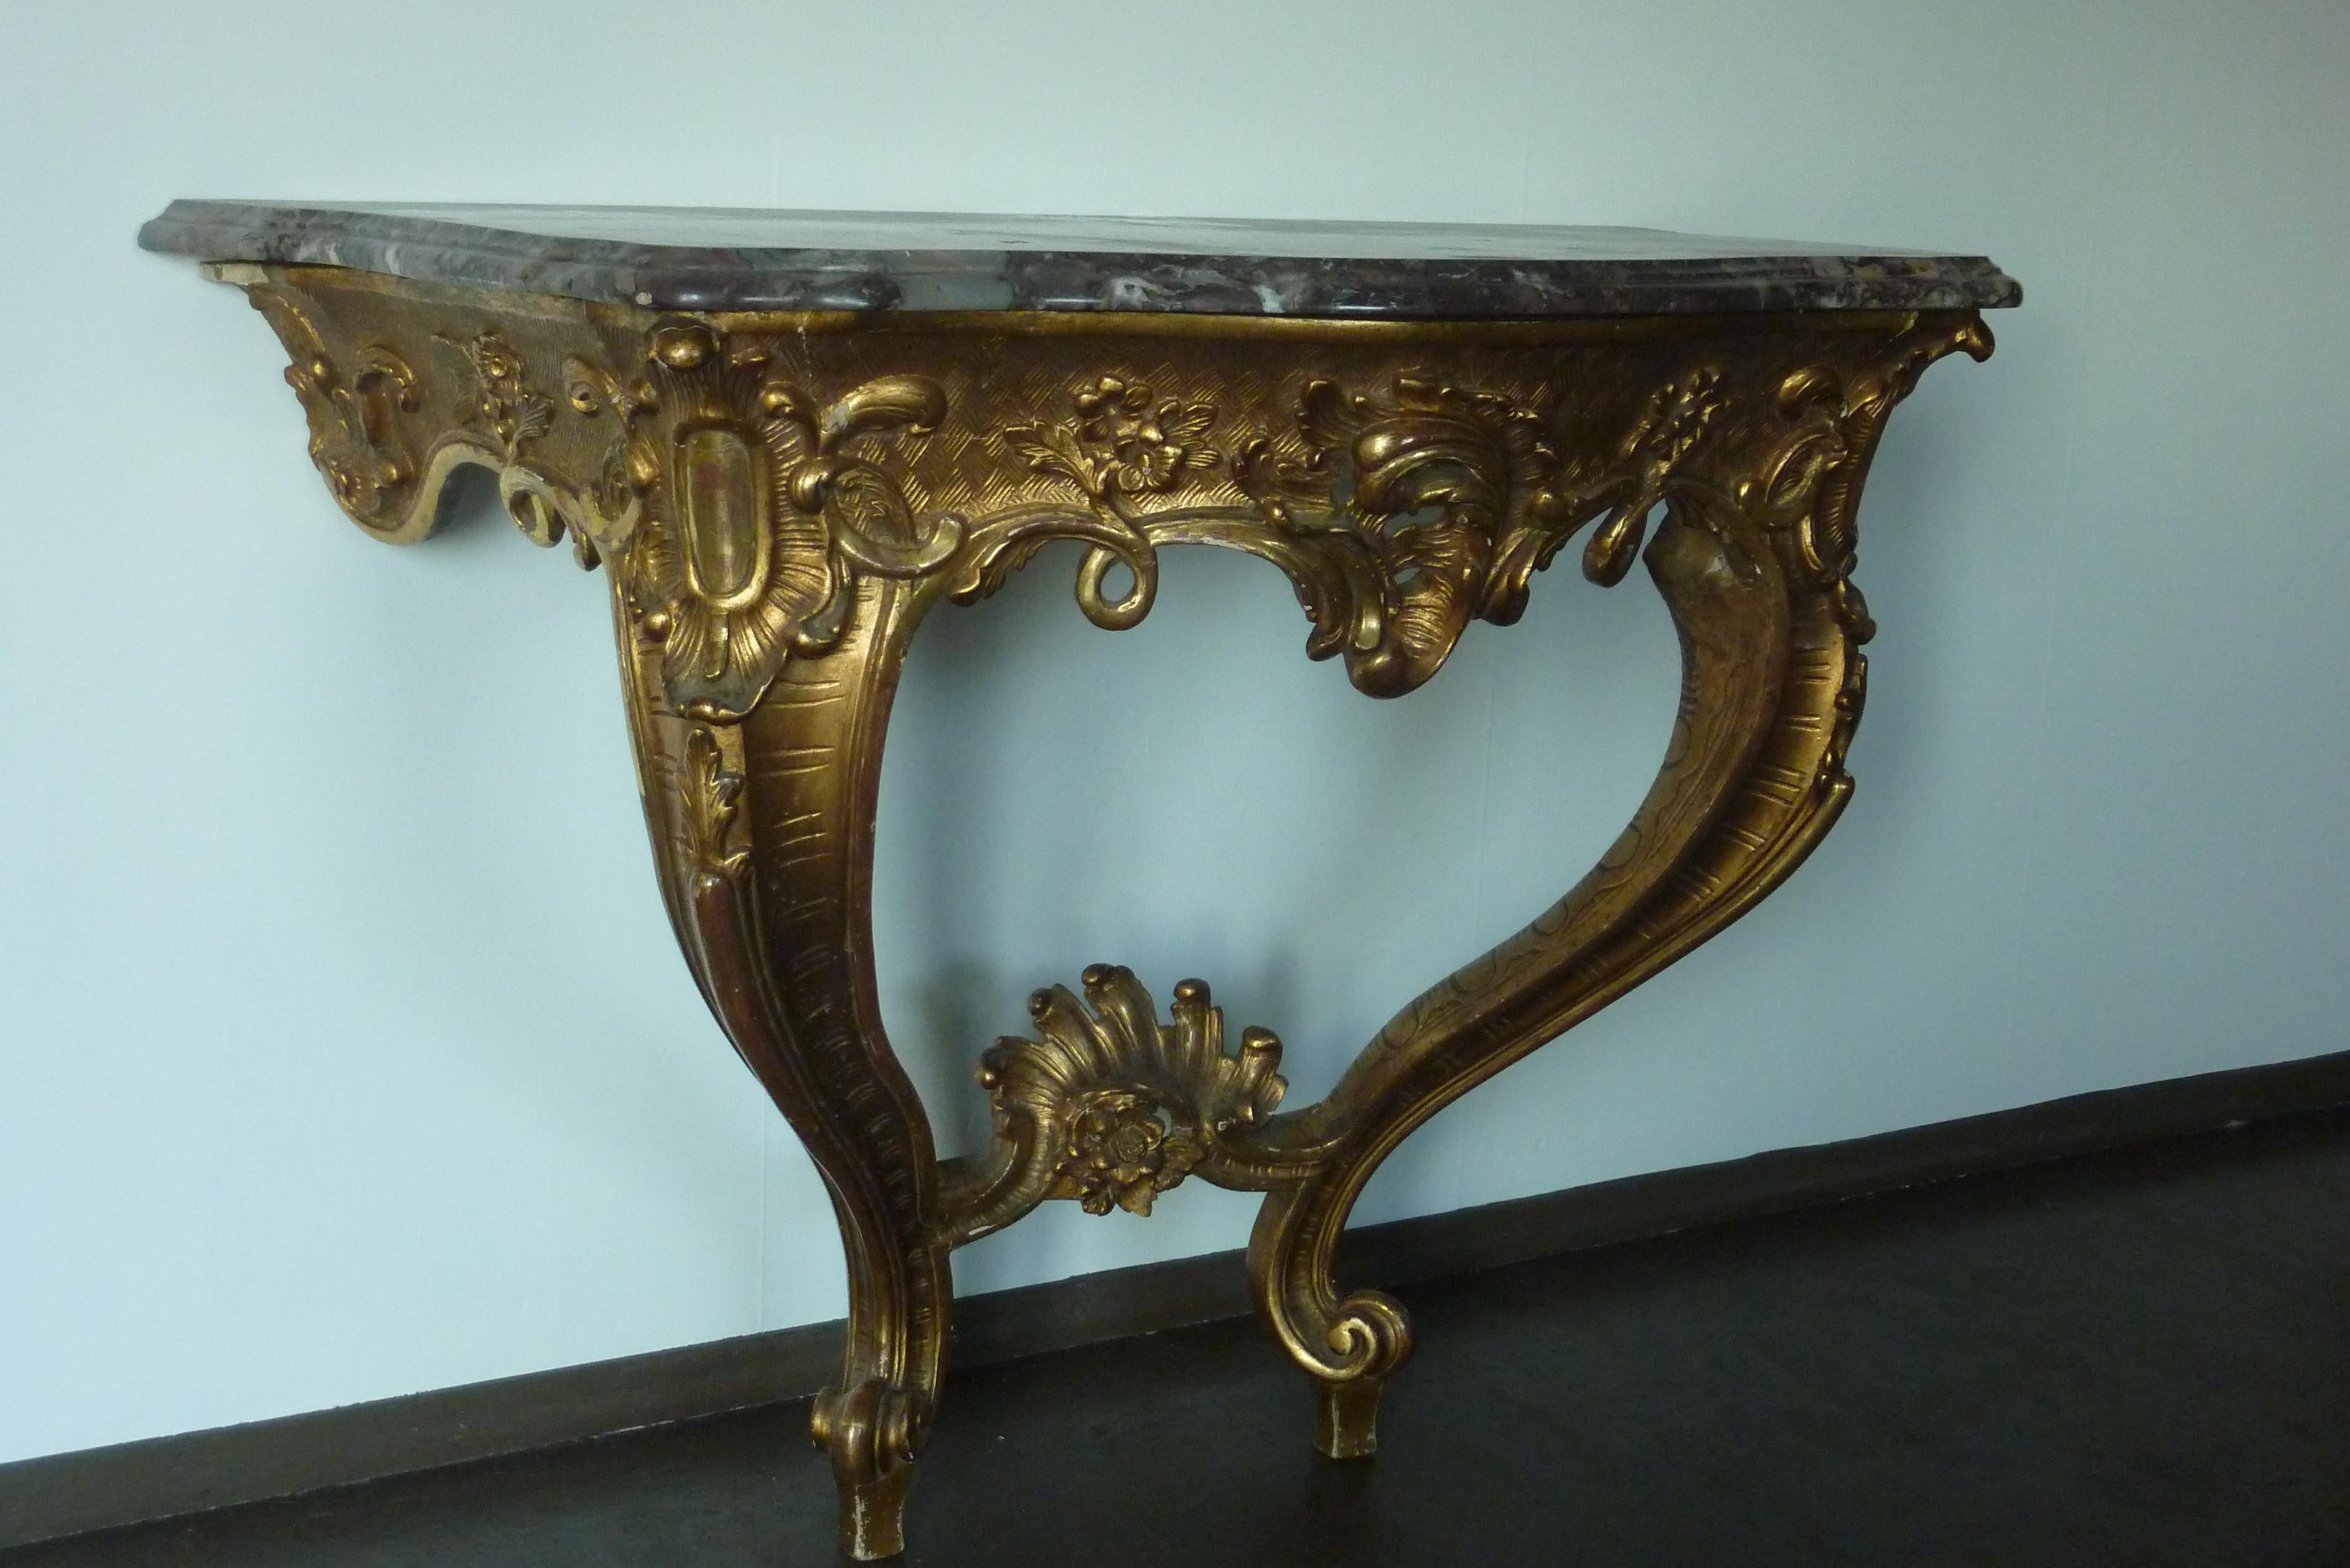 19th Century Rococo Louis XV Style Gilded Console Table with a original Marble Top.
The hardwood base is plated with gold leaf, the ornaments are made from a combination of chalk and bone glue.
The console table is made between 1850 and 1870.
The